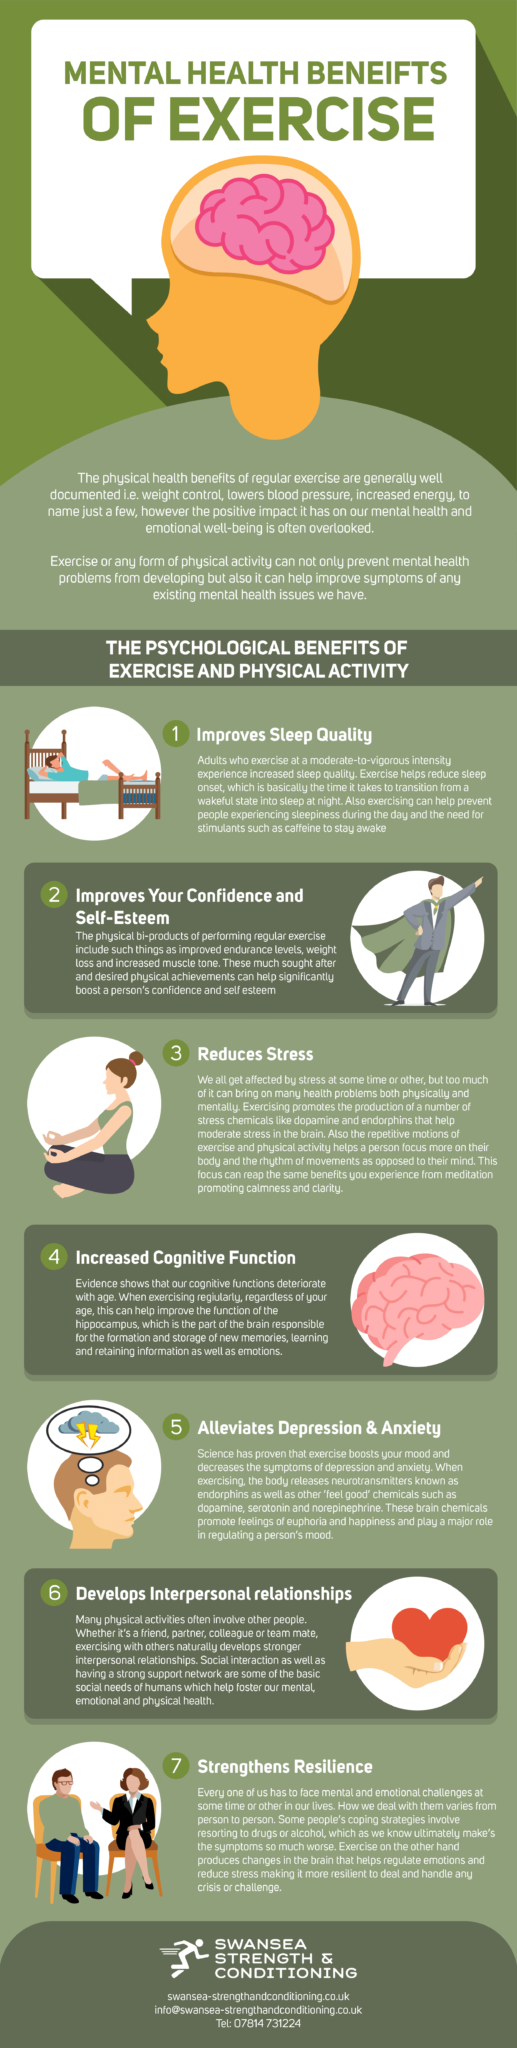 mental-health-benefits-of-exercise-infographic-ssac